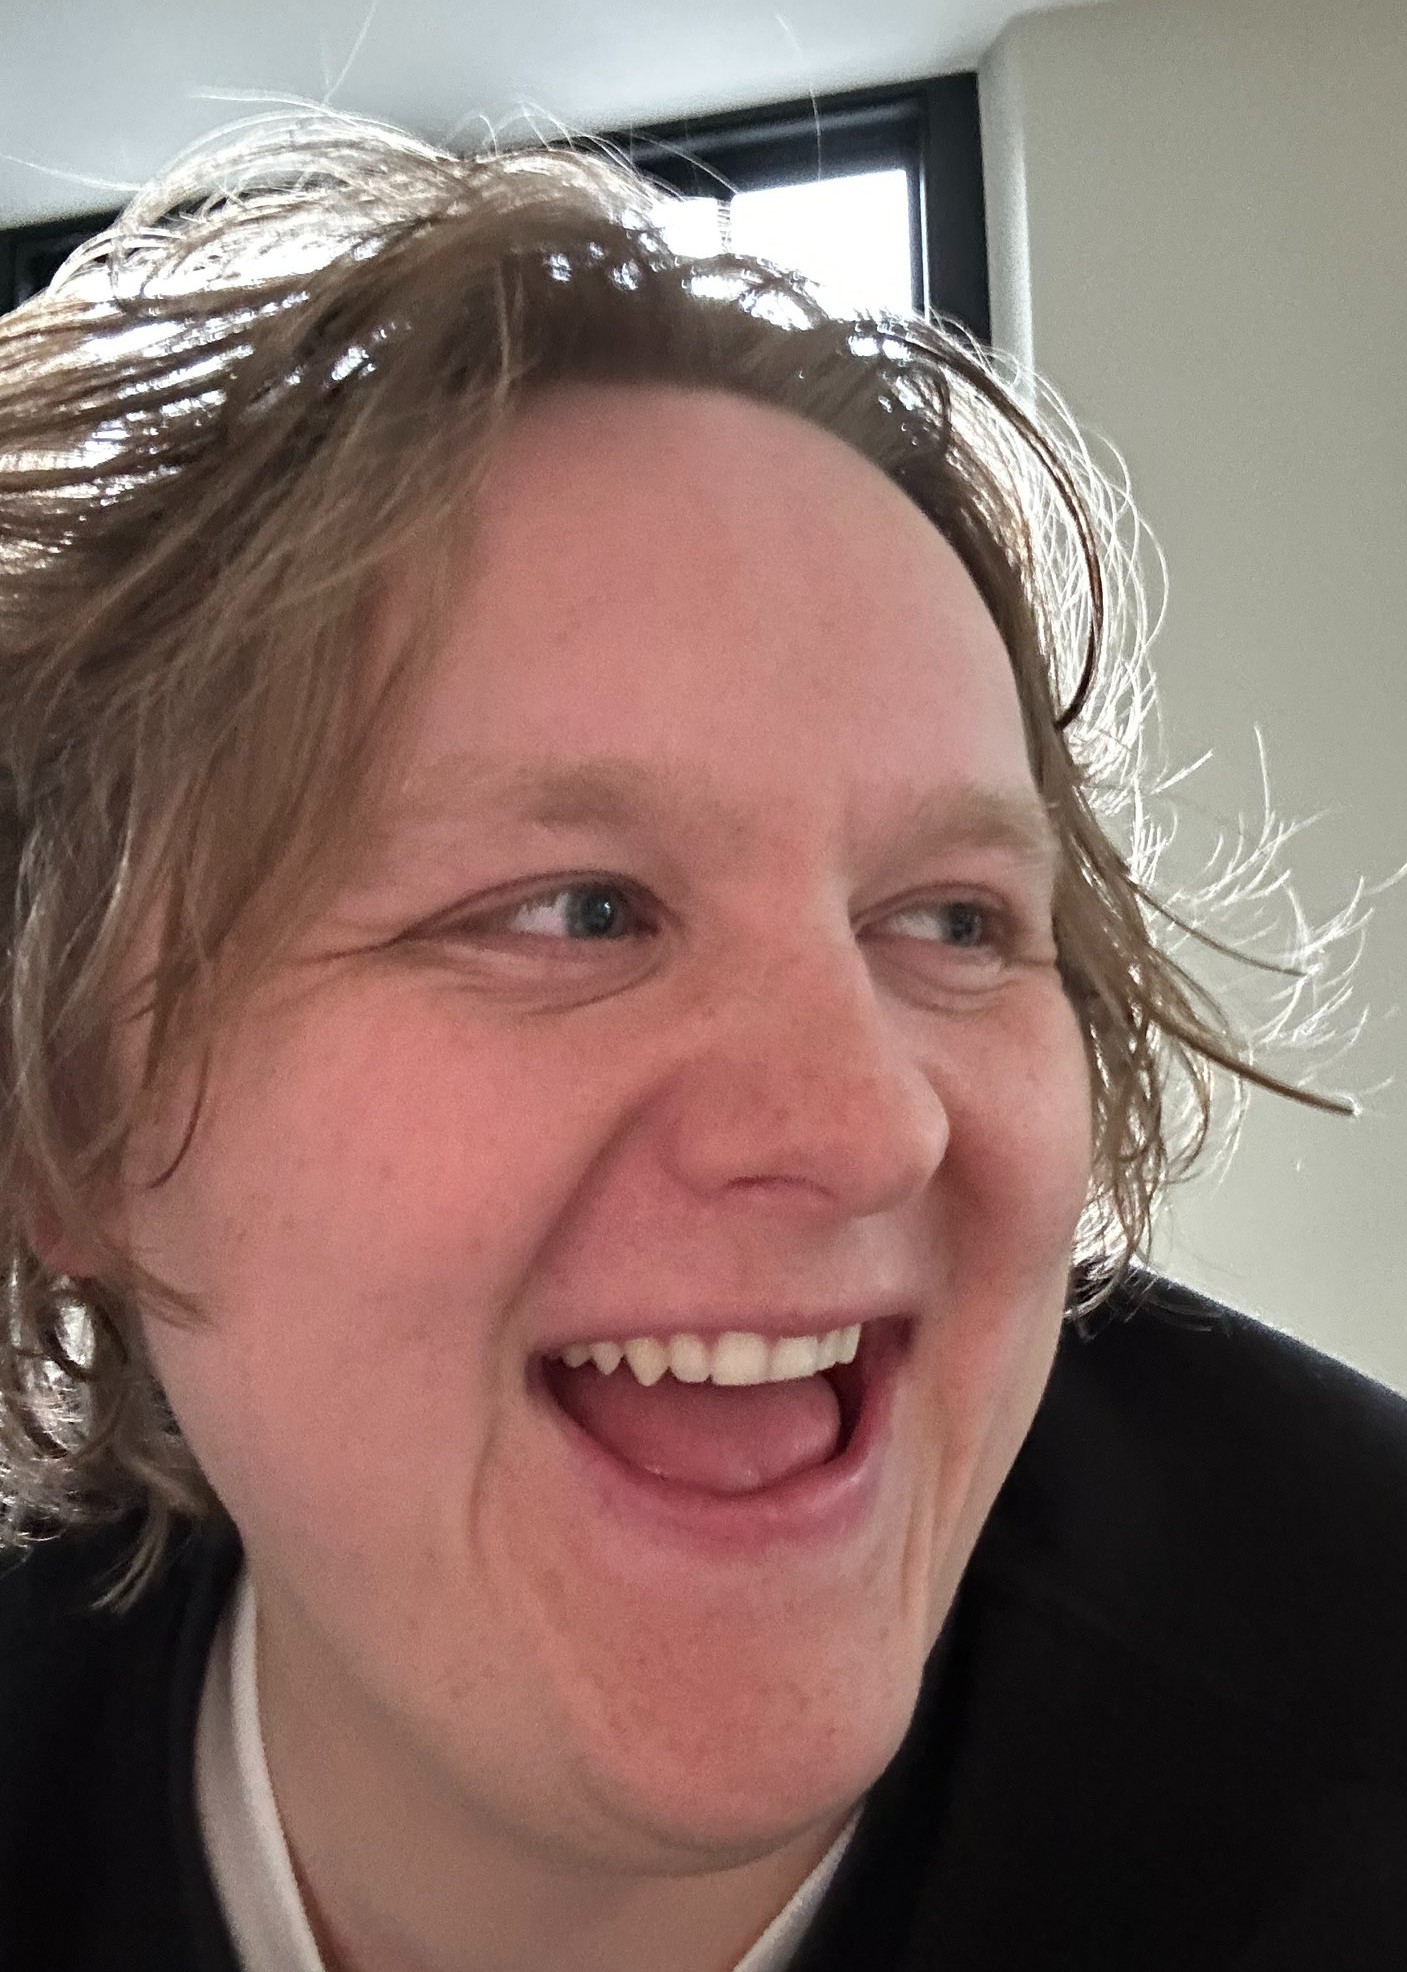  Lewis Capaldi Taking Break From Tour For Health Reasons